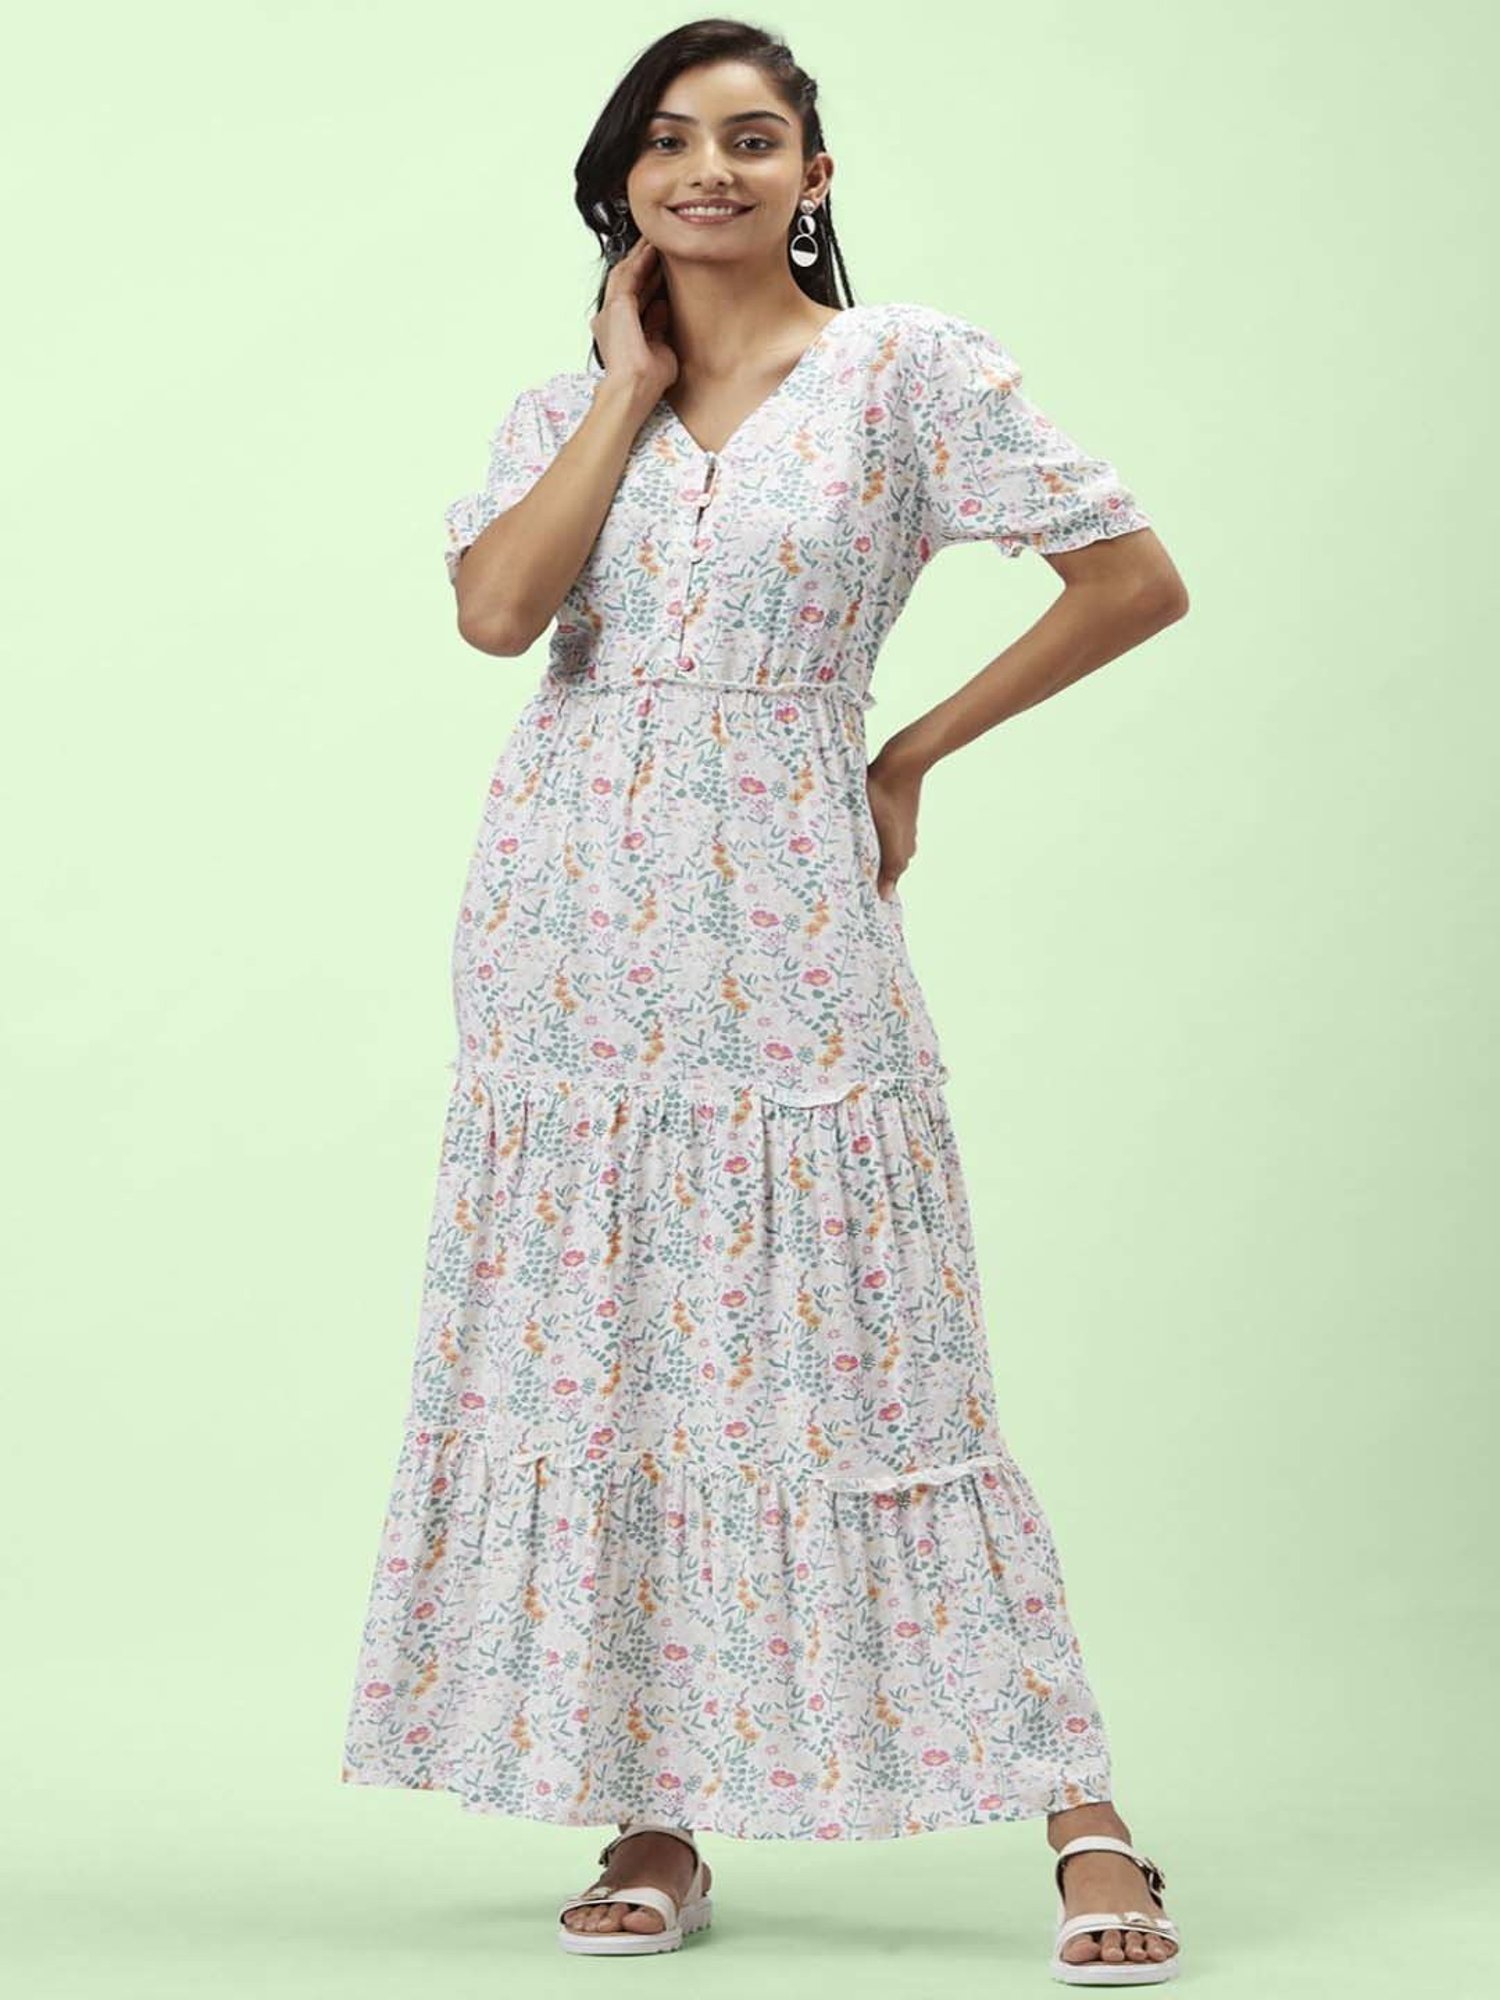 Top more than 143 white floral maxi dress super hot